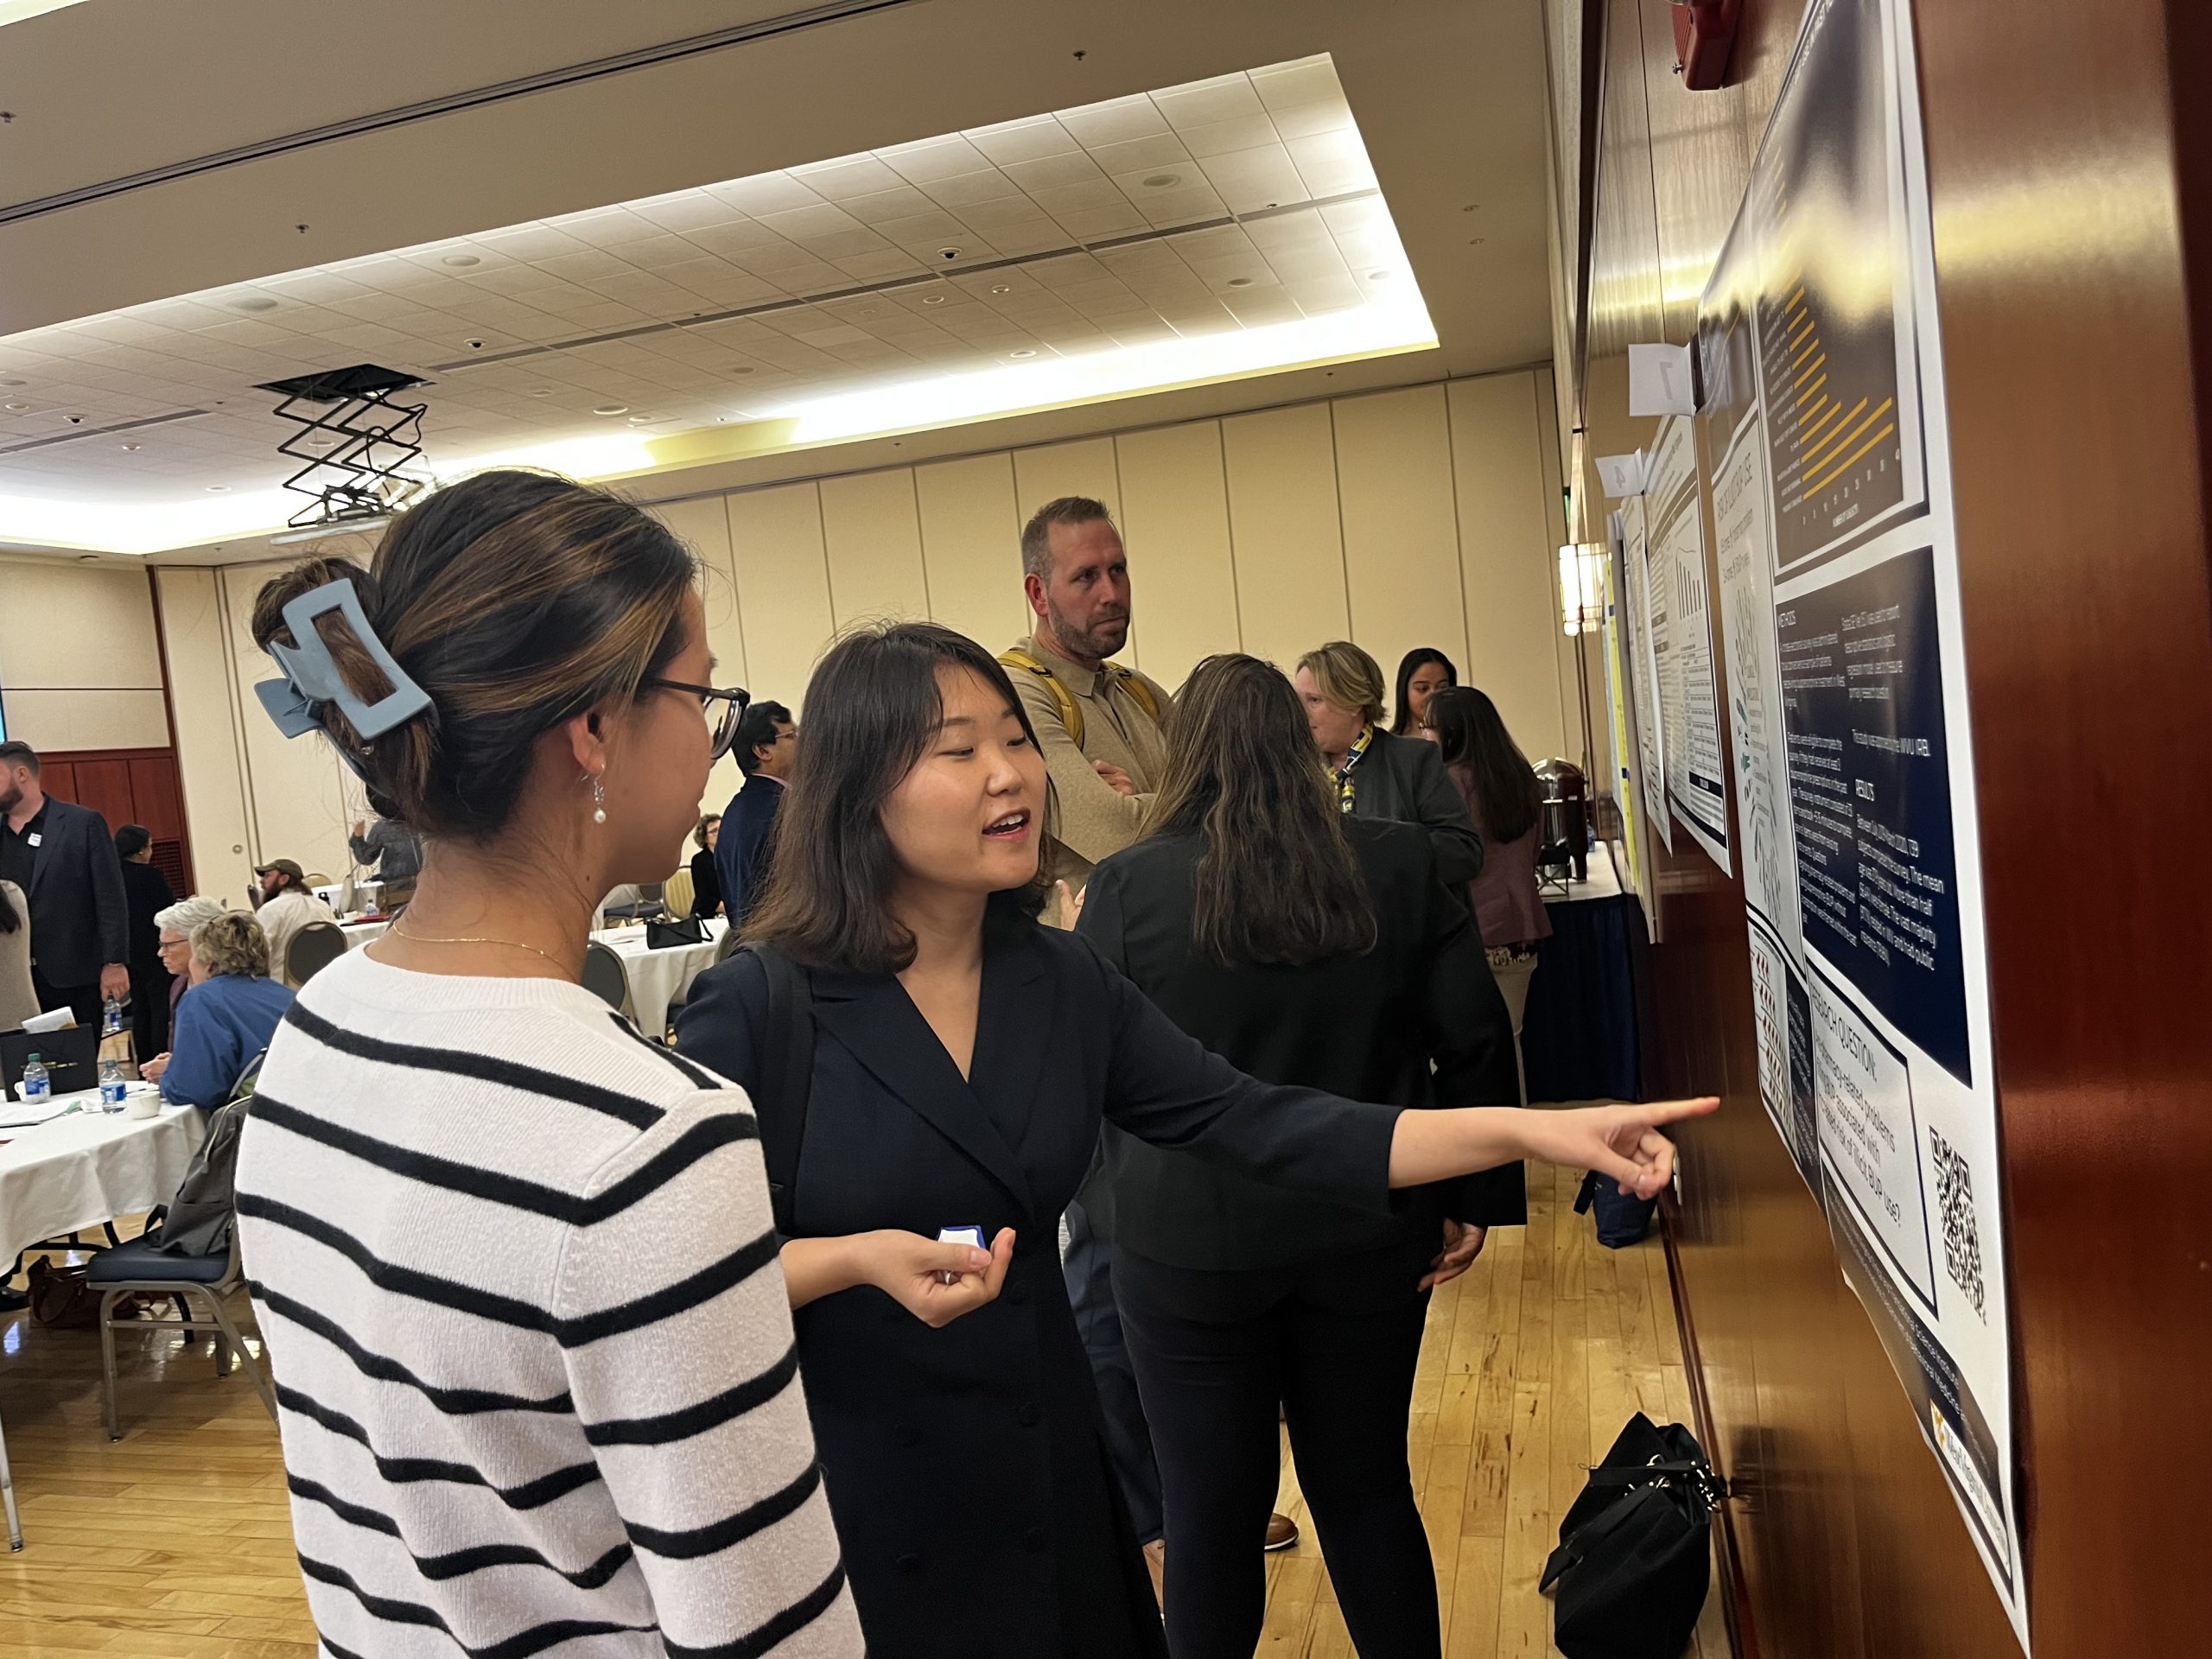 Dr Kang pointing at her poster and talking to an attendee